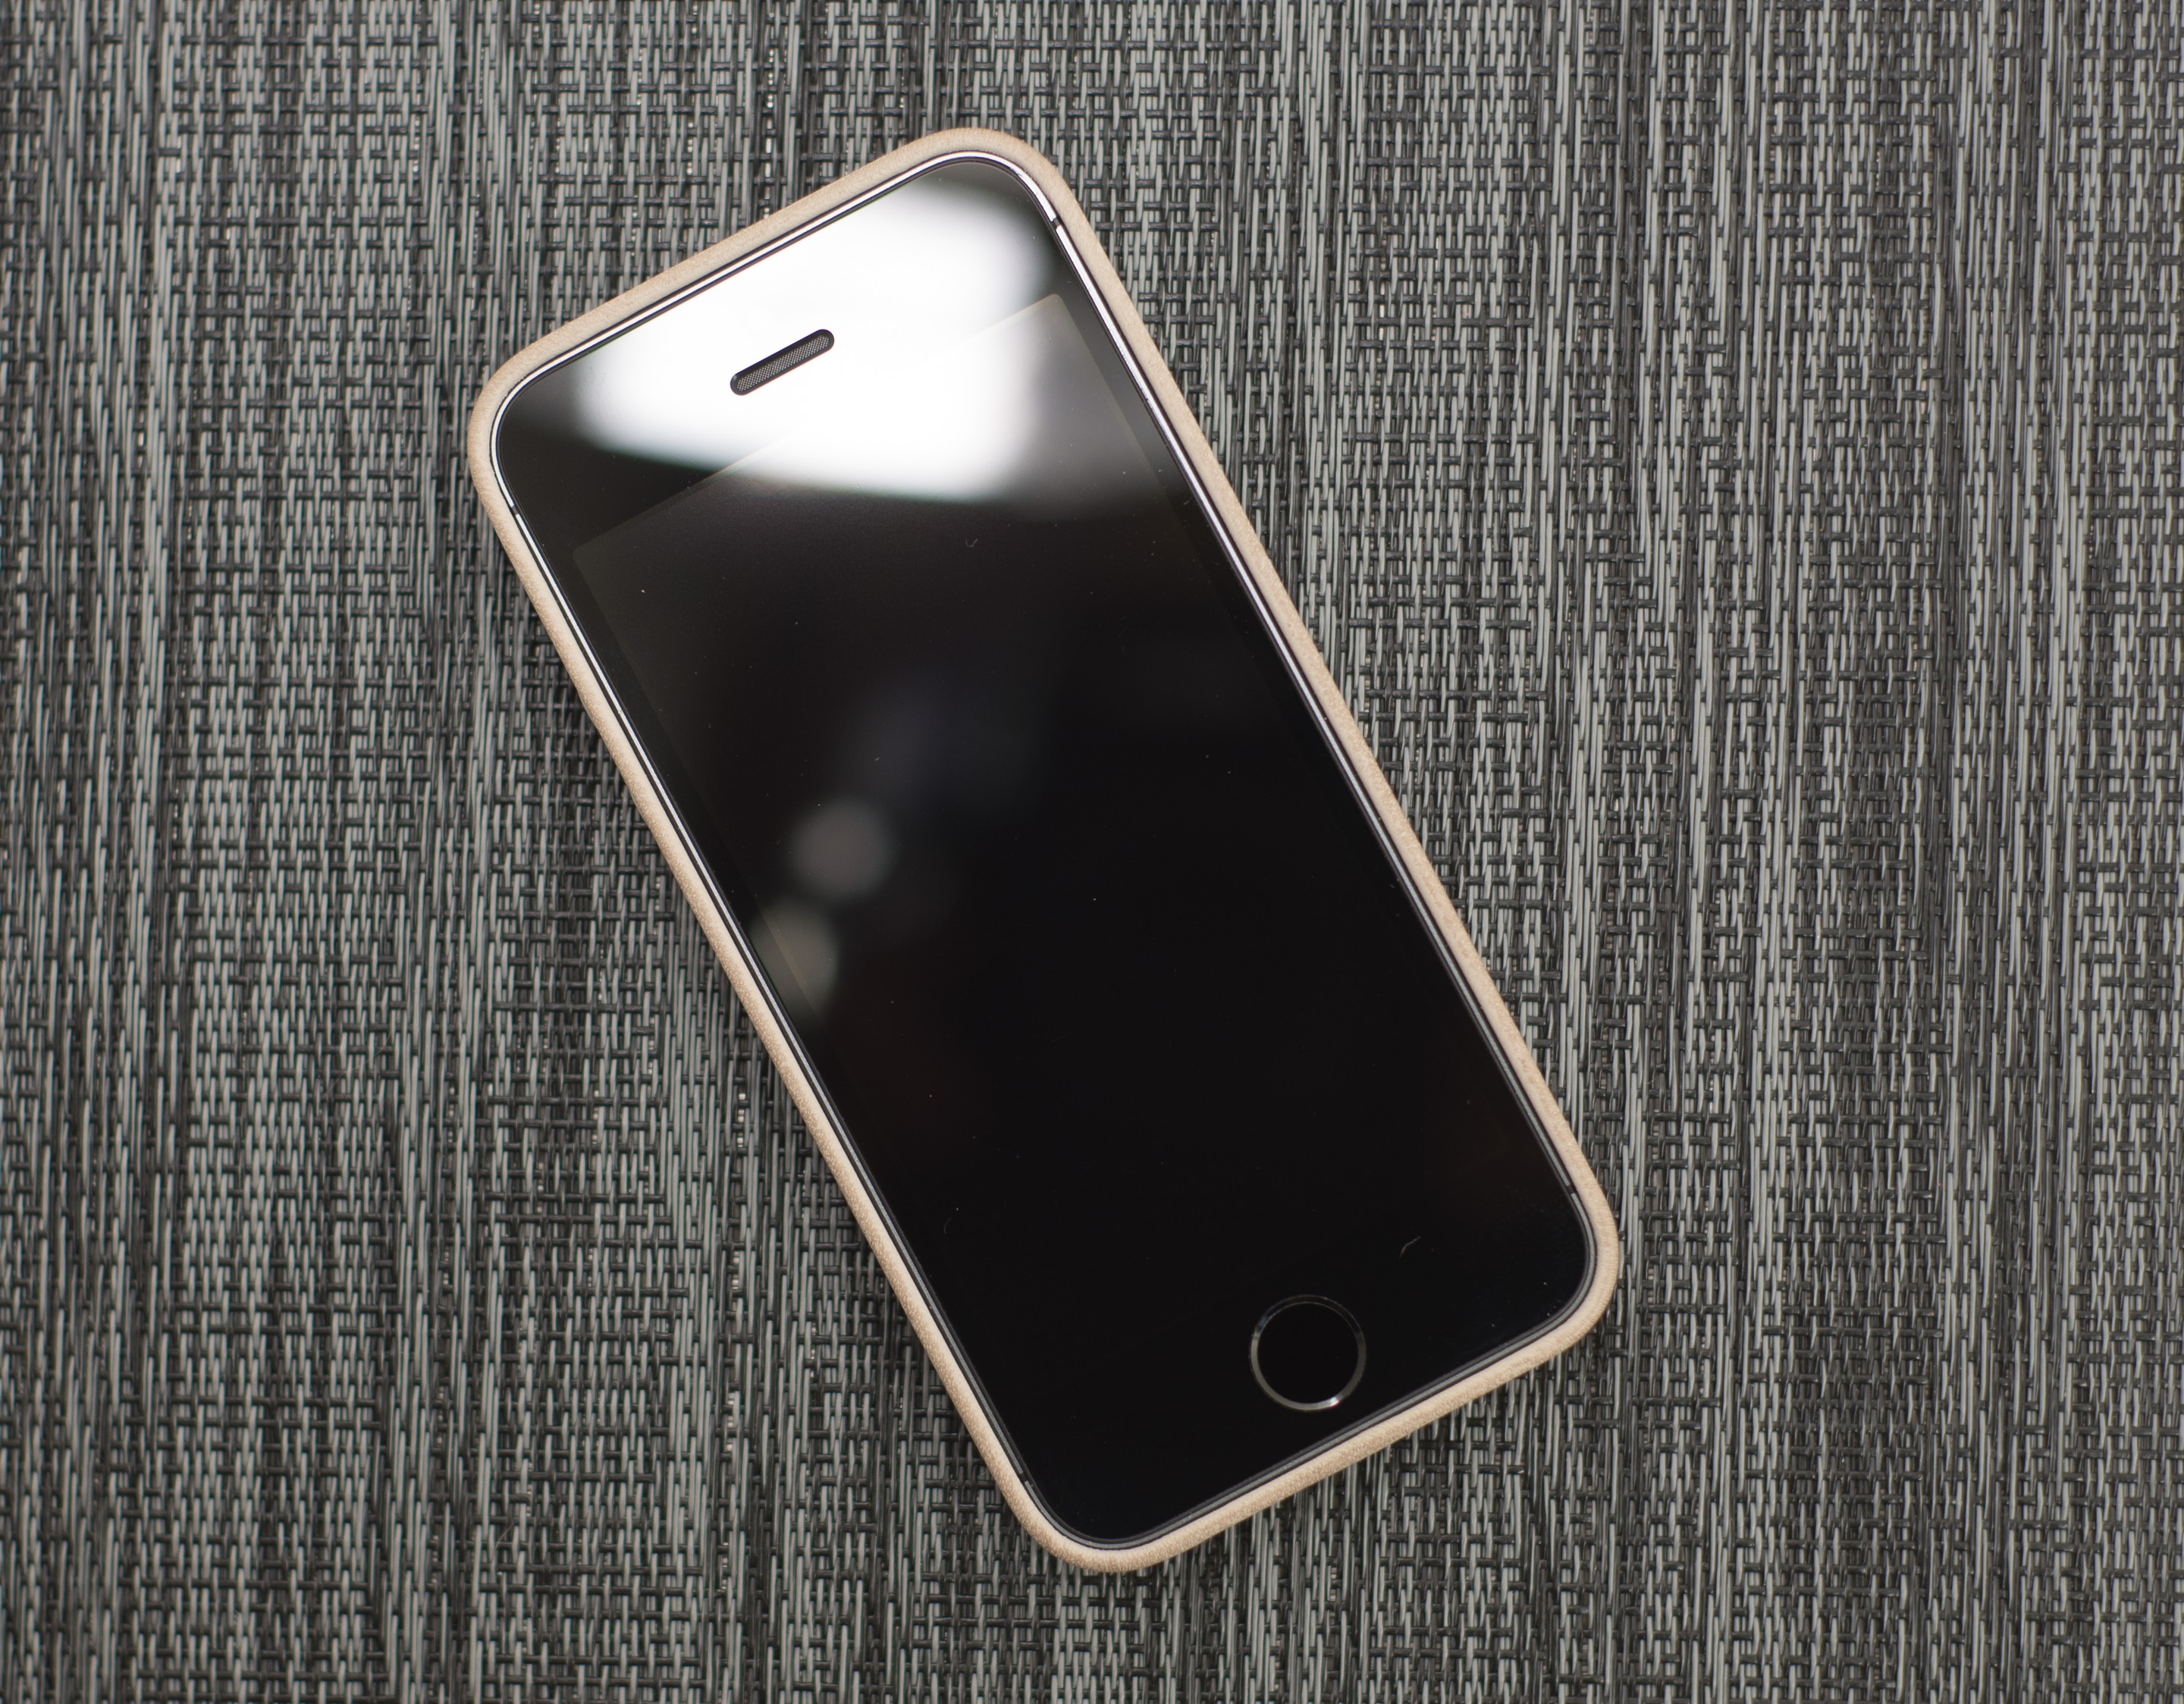 iPhone 5S review - The Verge